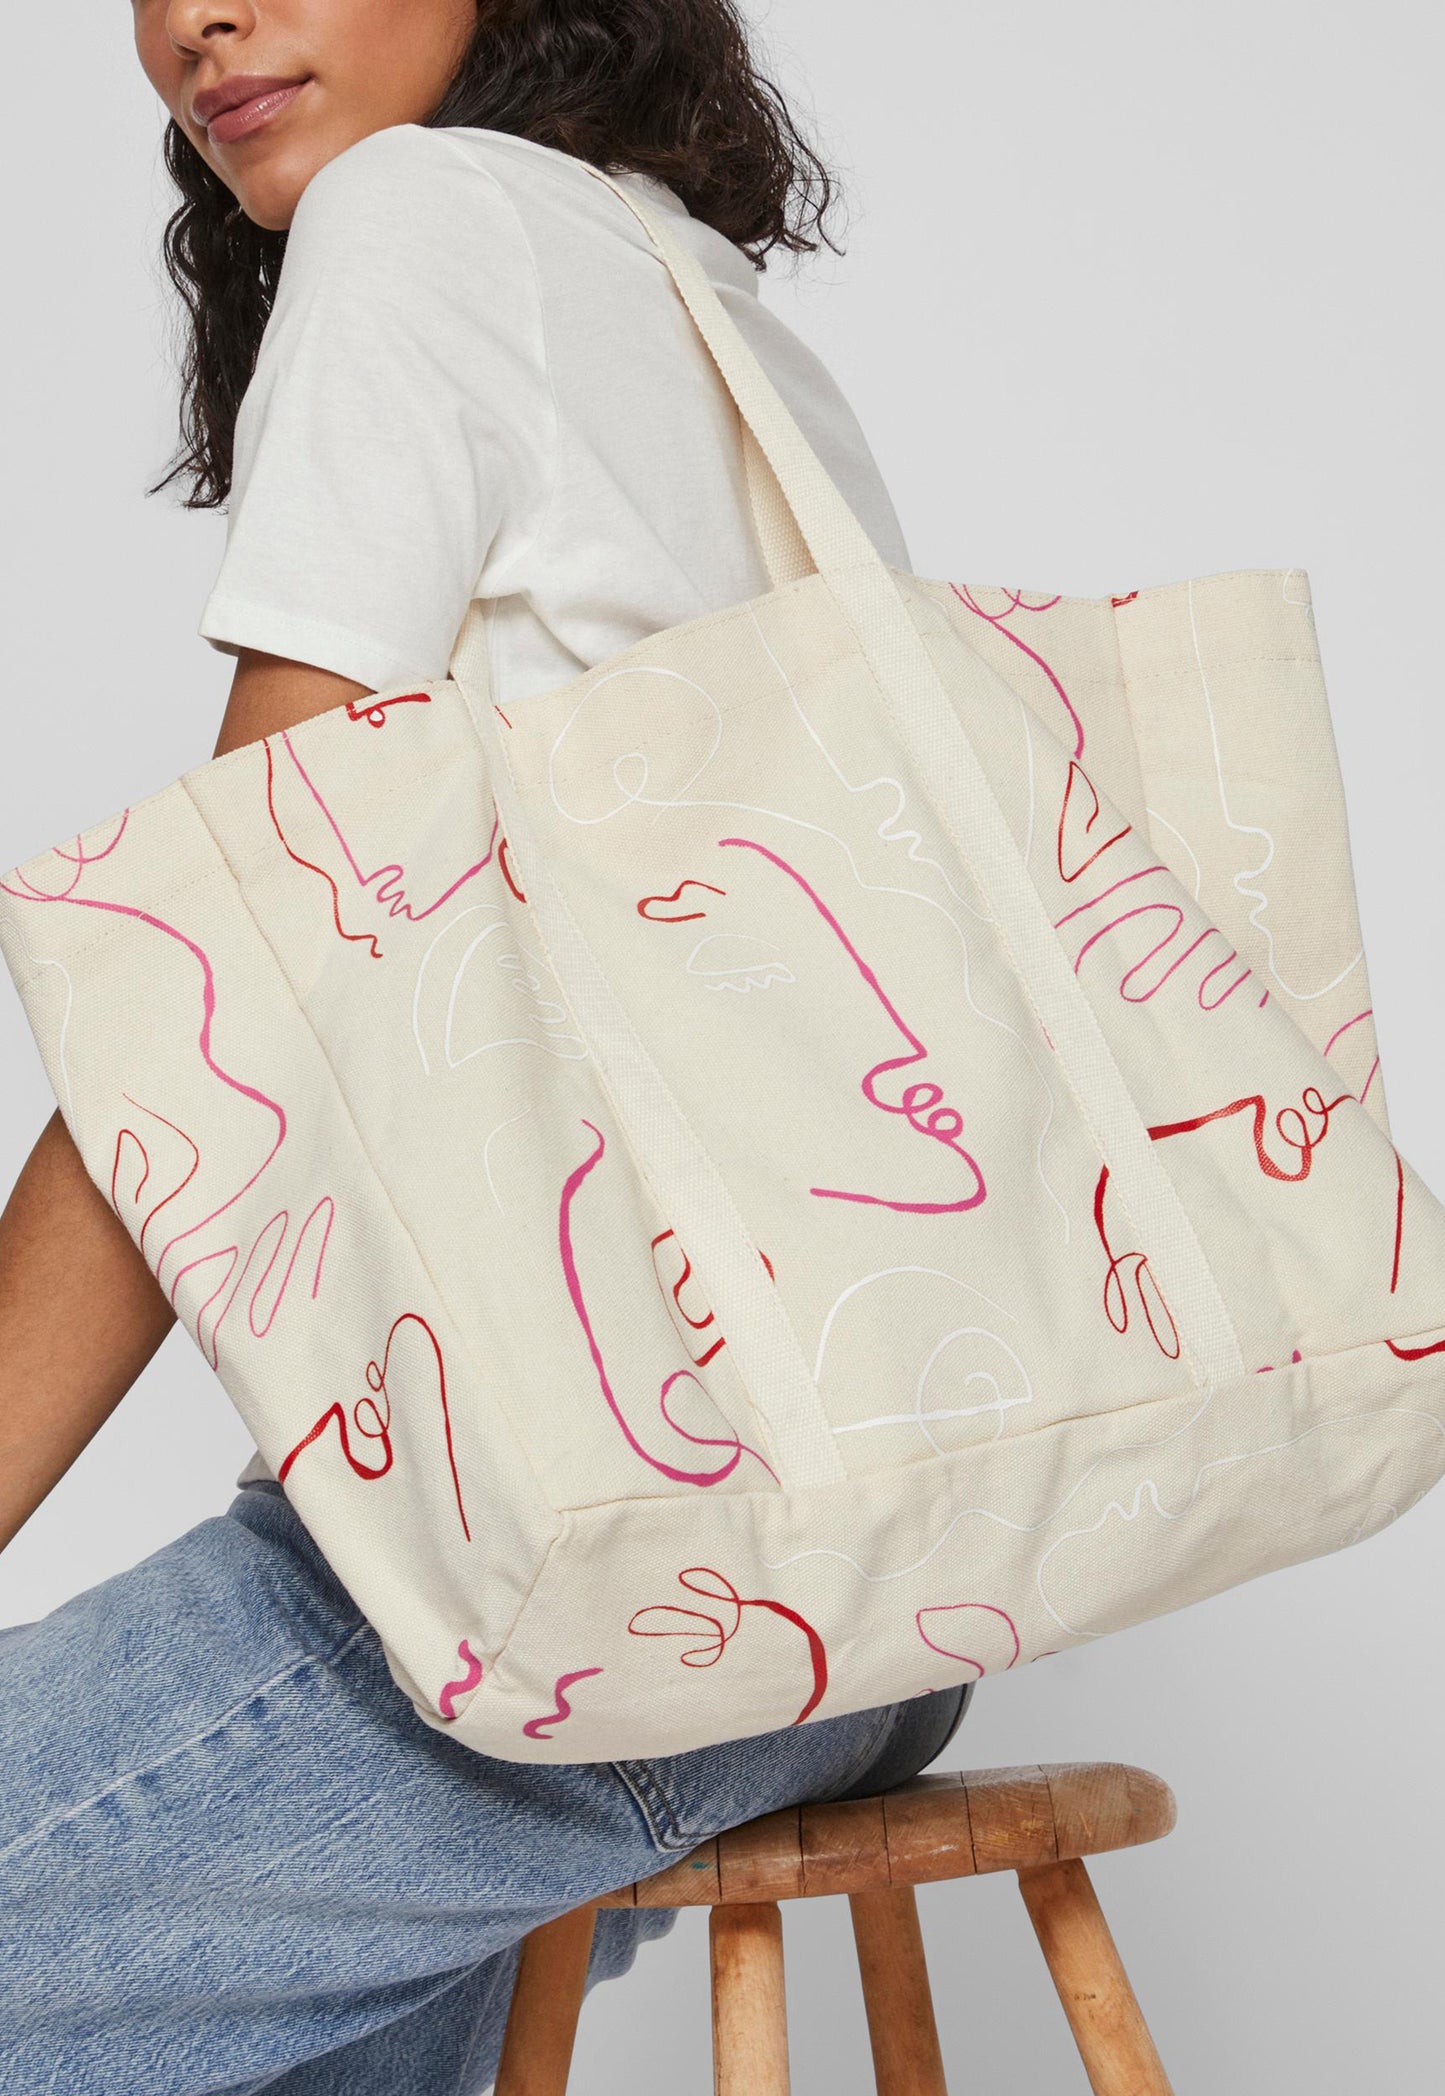 VILA Abstract Faces Canvas Tote Shopper Bag in Cream & Pink Tones - One Nation Clothing